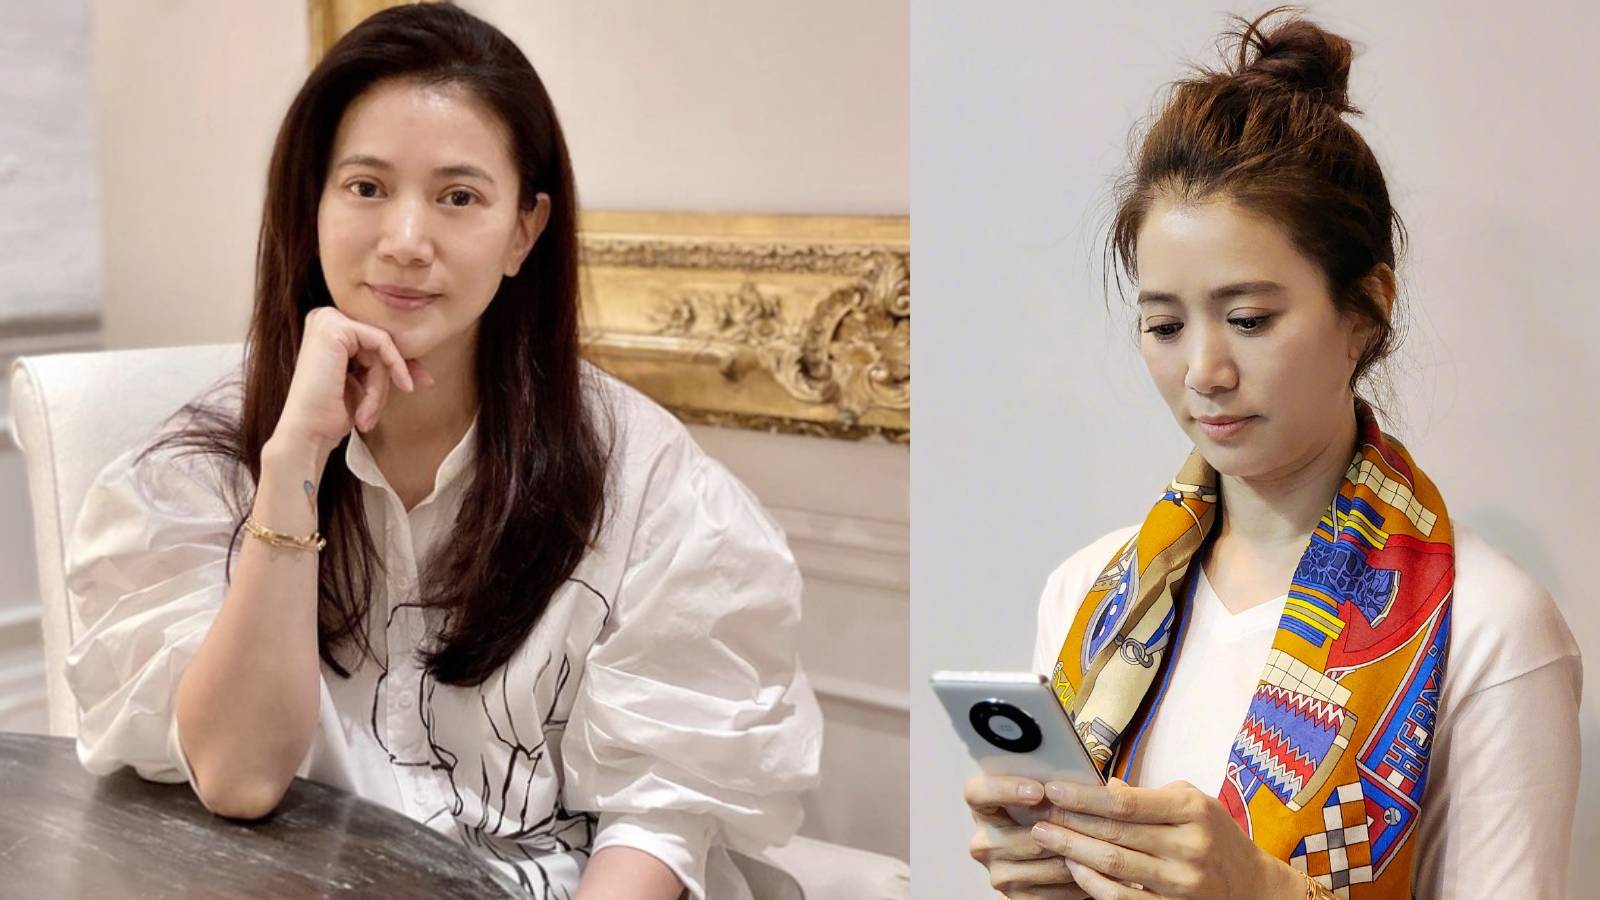 Anita Yuen Hits Back At Netizen Who Accused Her Of Having A "Bad Temper”